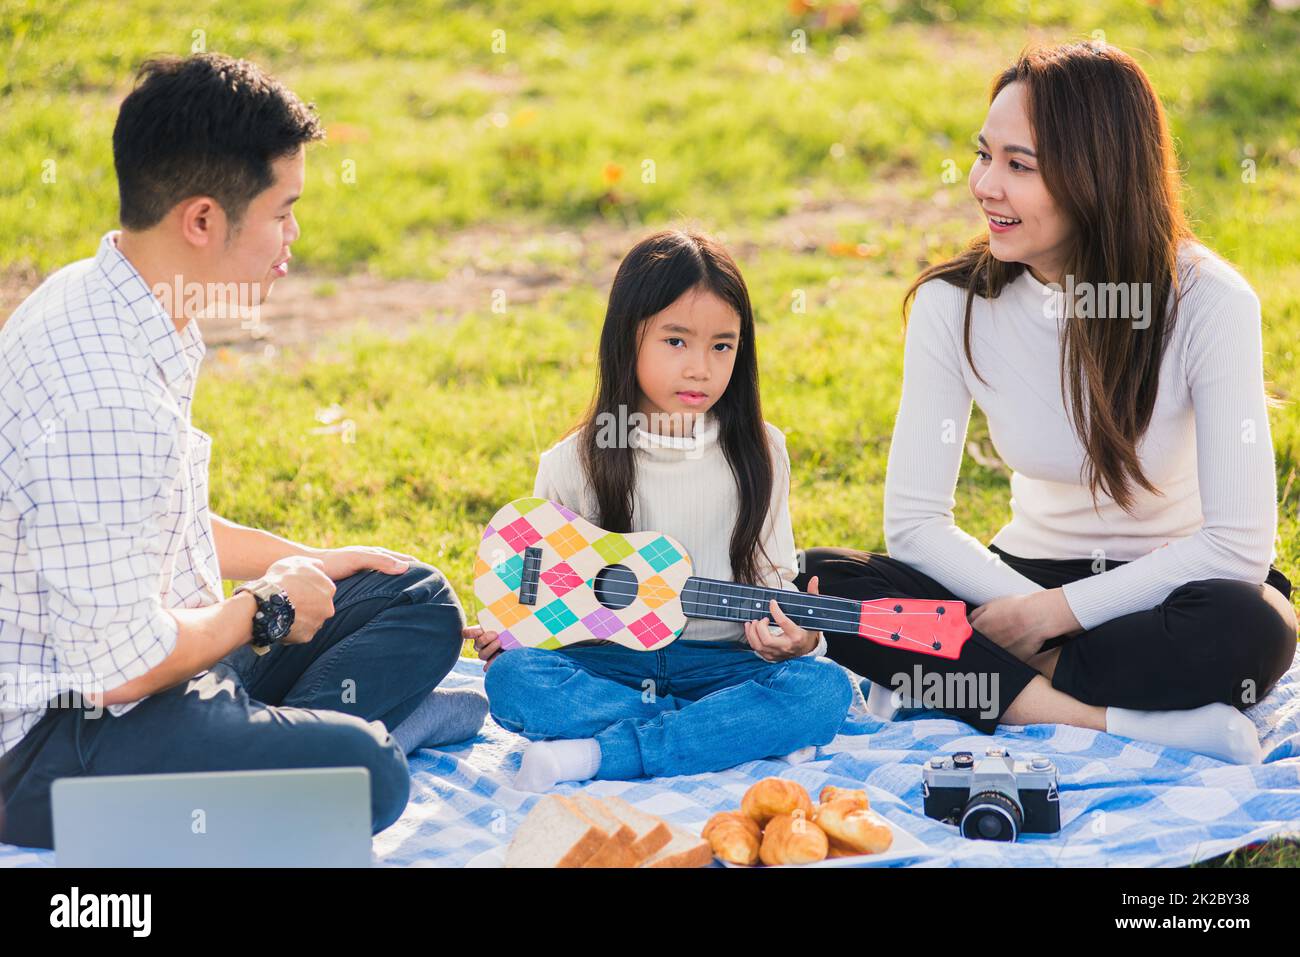 family father, mother and children having fun and enjoying outdoor together Stock Photo